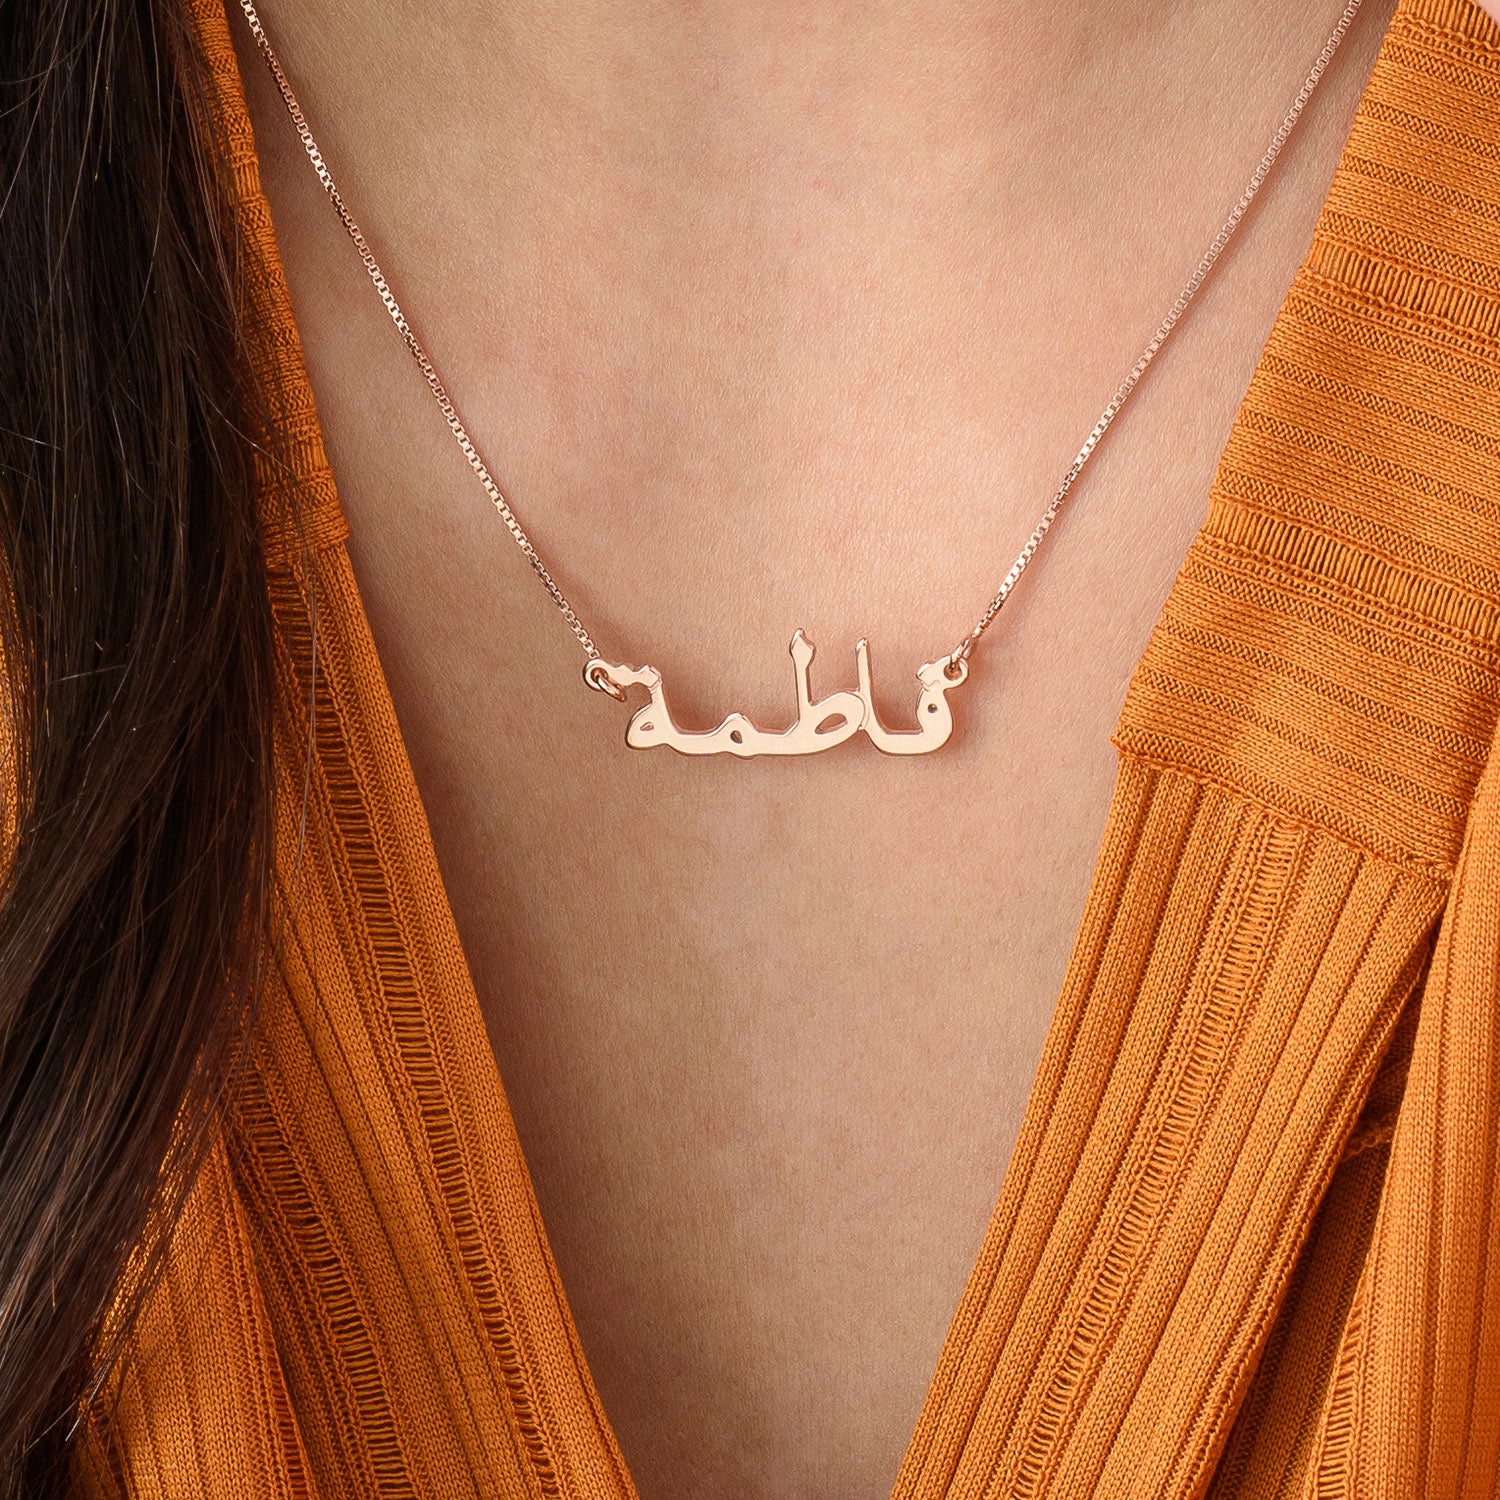 Personalized Arabic Name Necklace Arabic Name Necklace, İslamic Jewelry,  Personalized Necklace, İslamic Gift Necklace, Gift for Her - Etsy Canada |  Islamic jewelry, Necklace, Name necklace